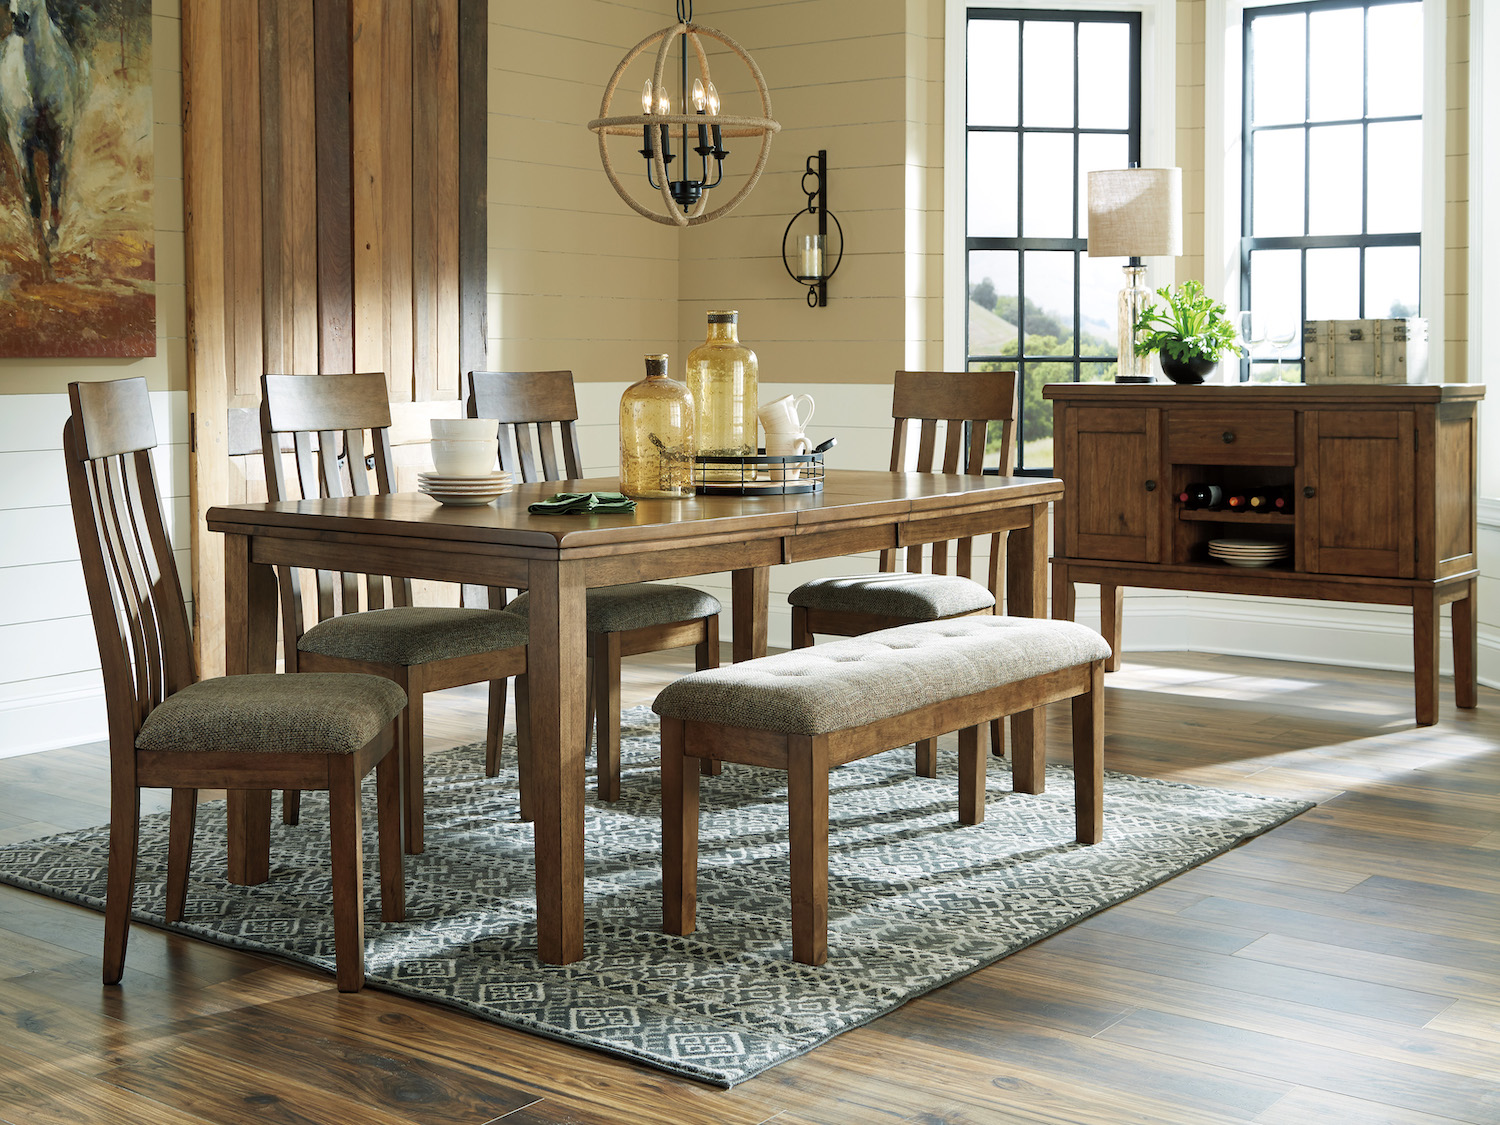 Rooms To Go Square Pedestal Dining Room Set